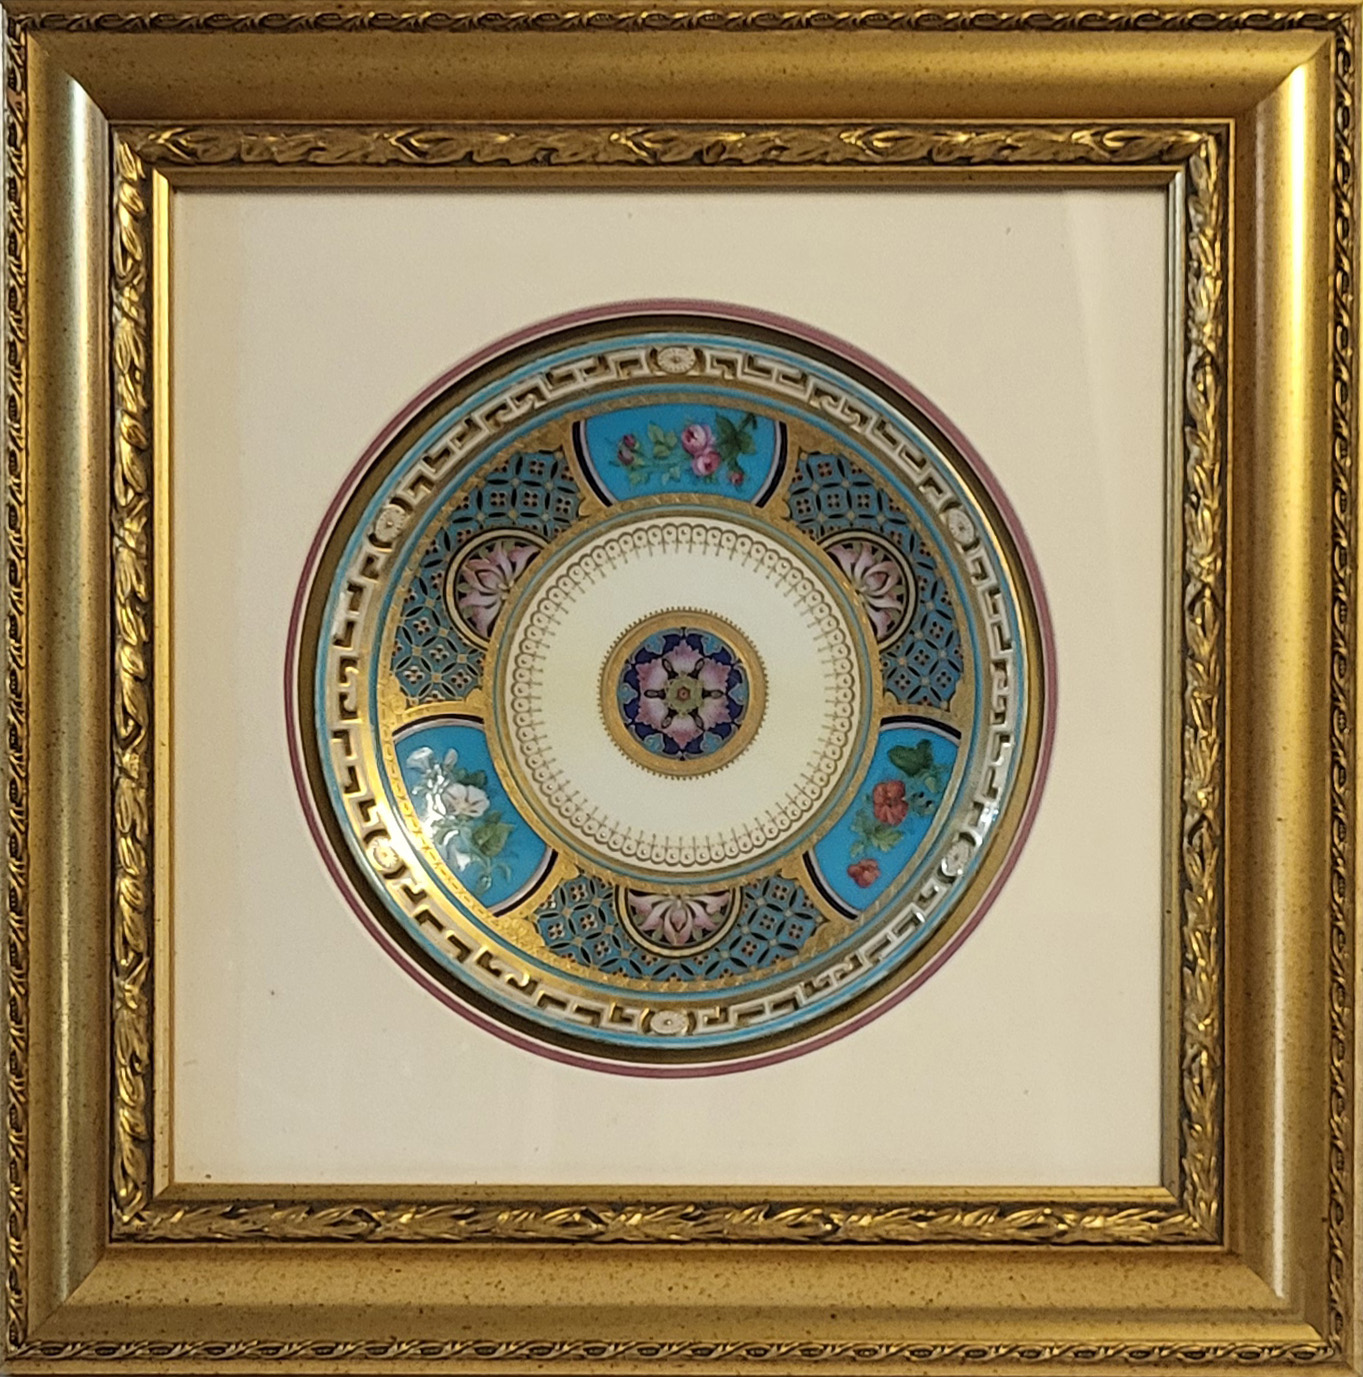 A 19TH CENTURY MINTON PORCELAIN AESTHETIC MOVEMENT CABINET PLATE Designed by Dr. Christopher